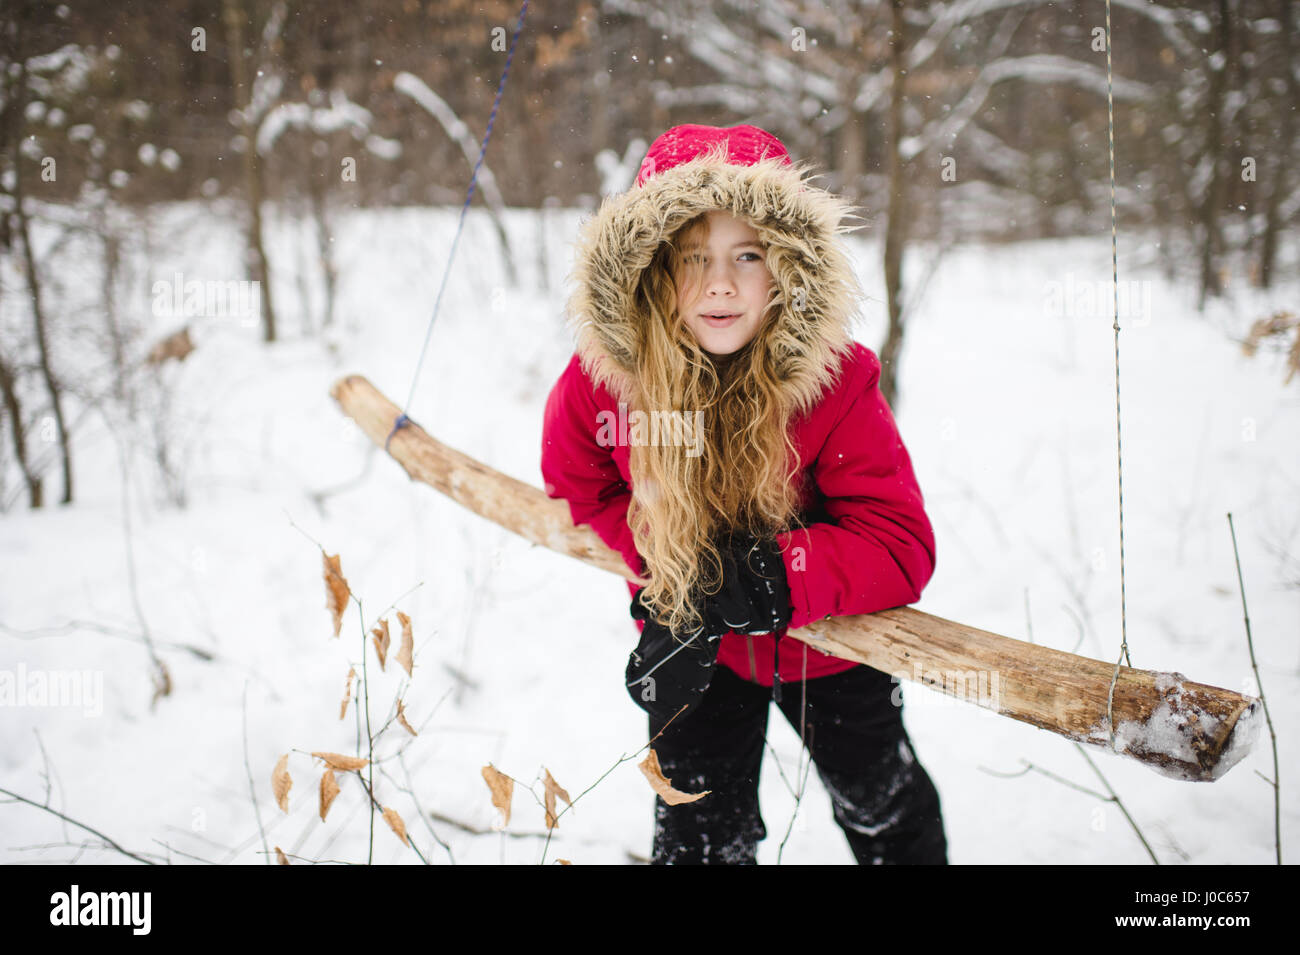 Girl leaning on wooden swing in woods Banque D'Images